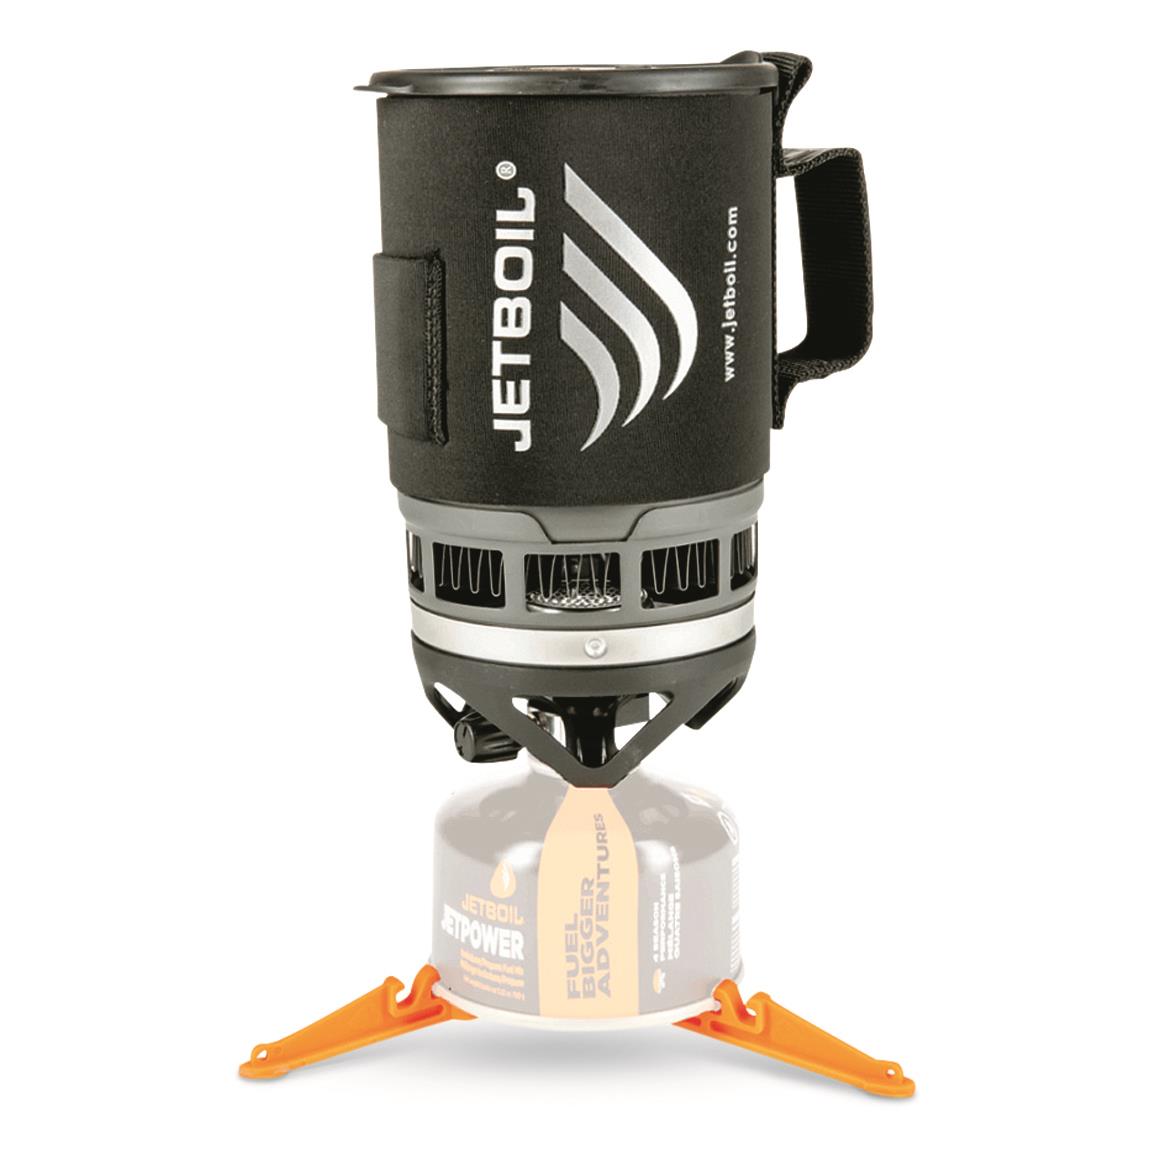 Jetboil Zip Cooking System, Carbon